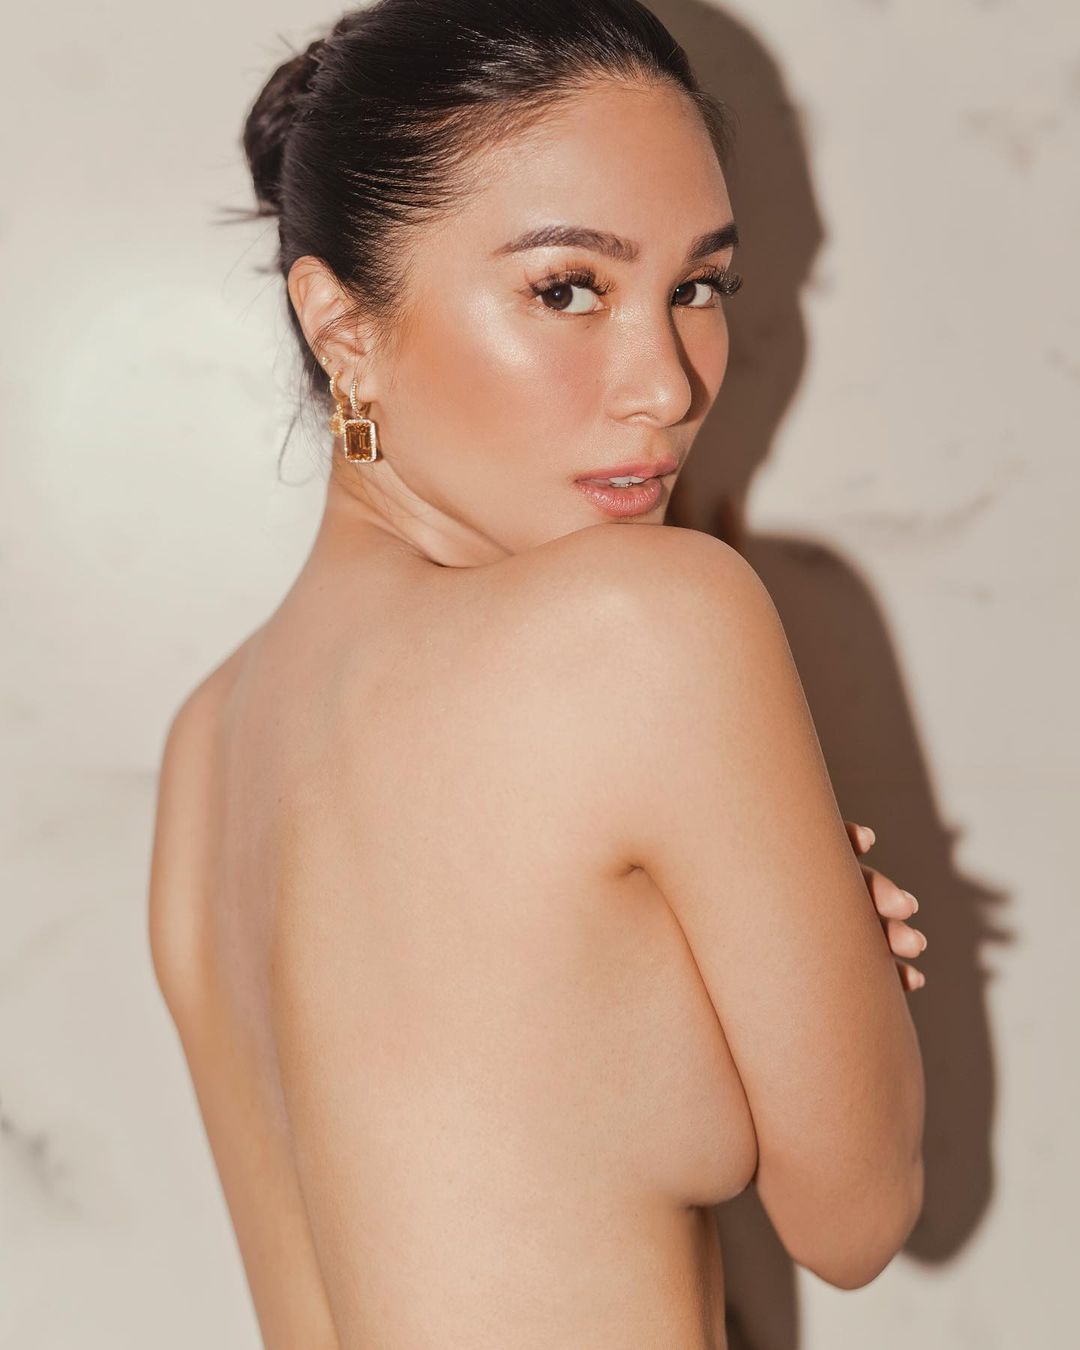 Filipina Celebrities With Classy Topless Photos